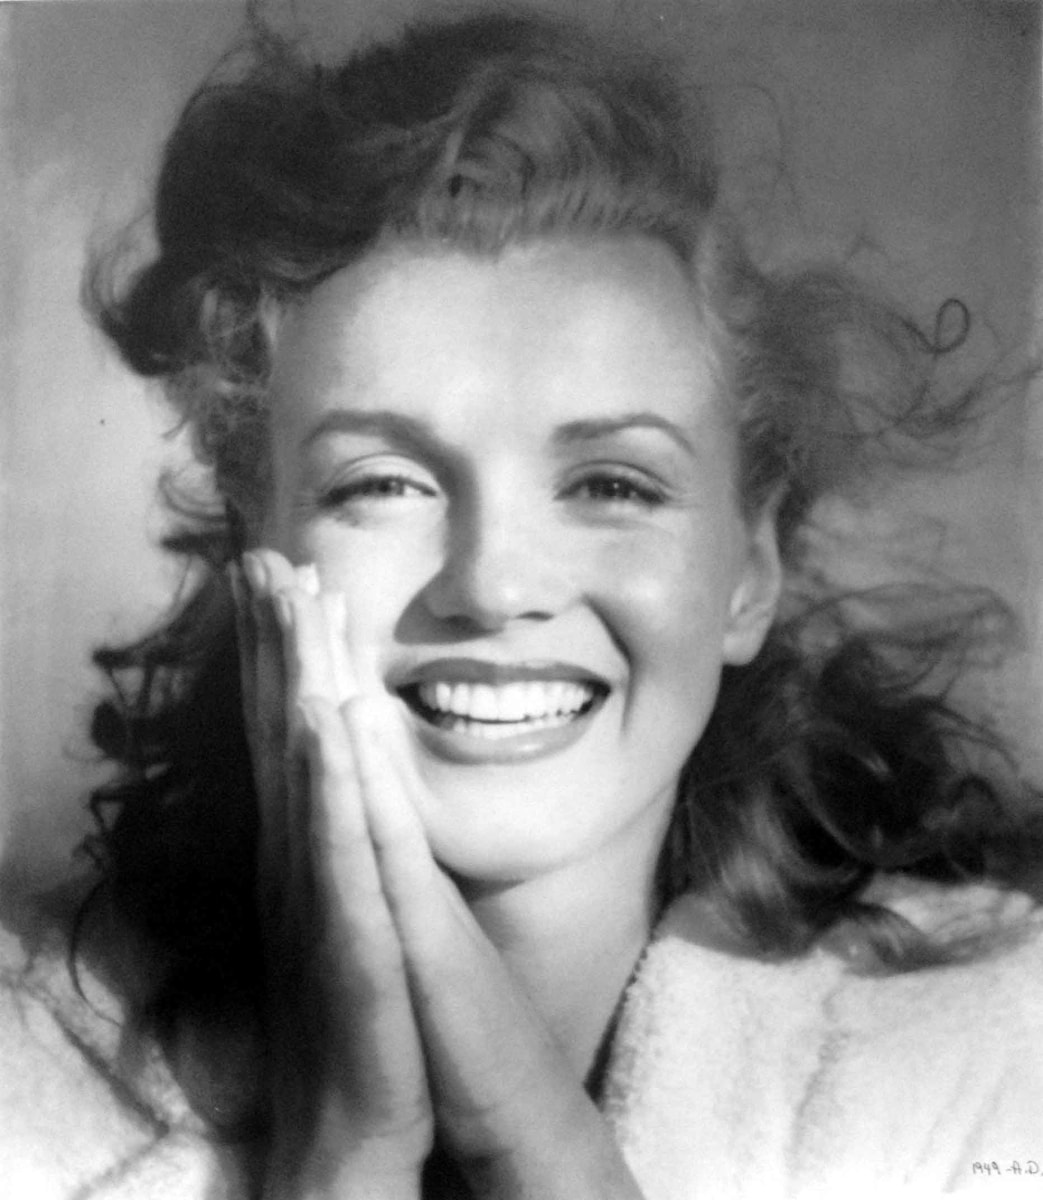 Andre de Dienes Marilyn and California Girls - Exhibitions pic